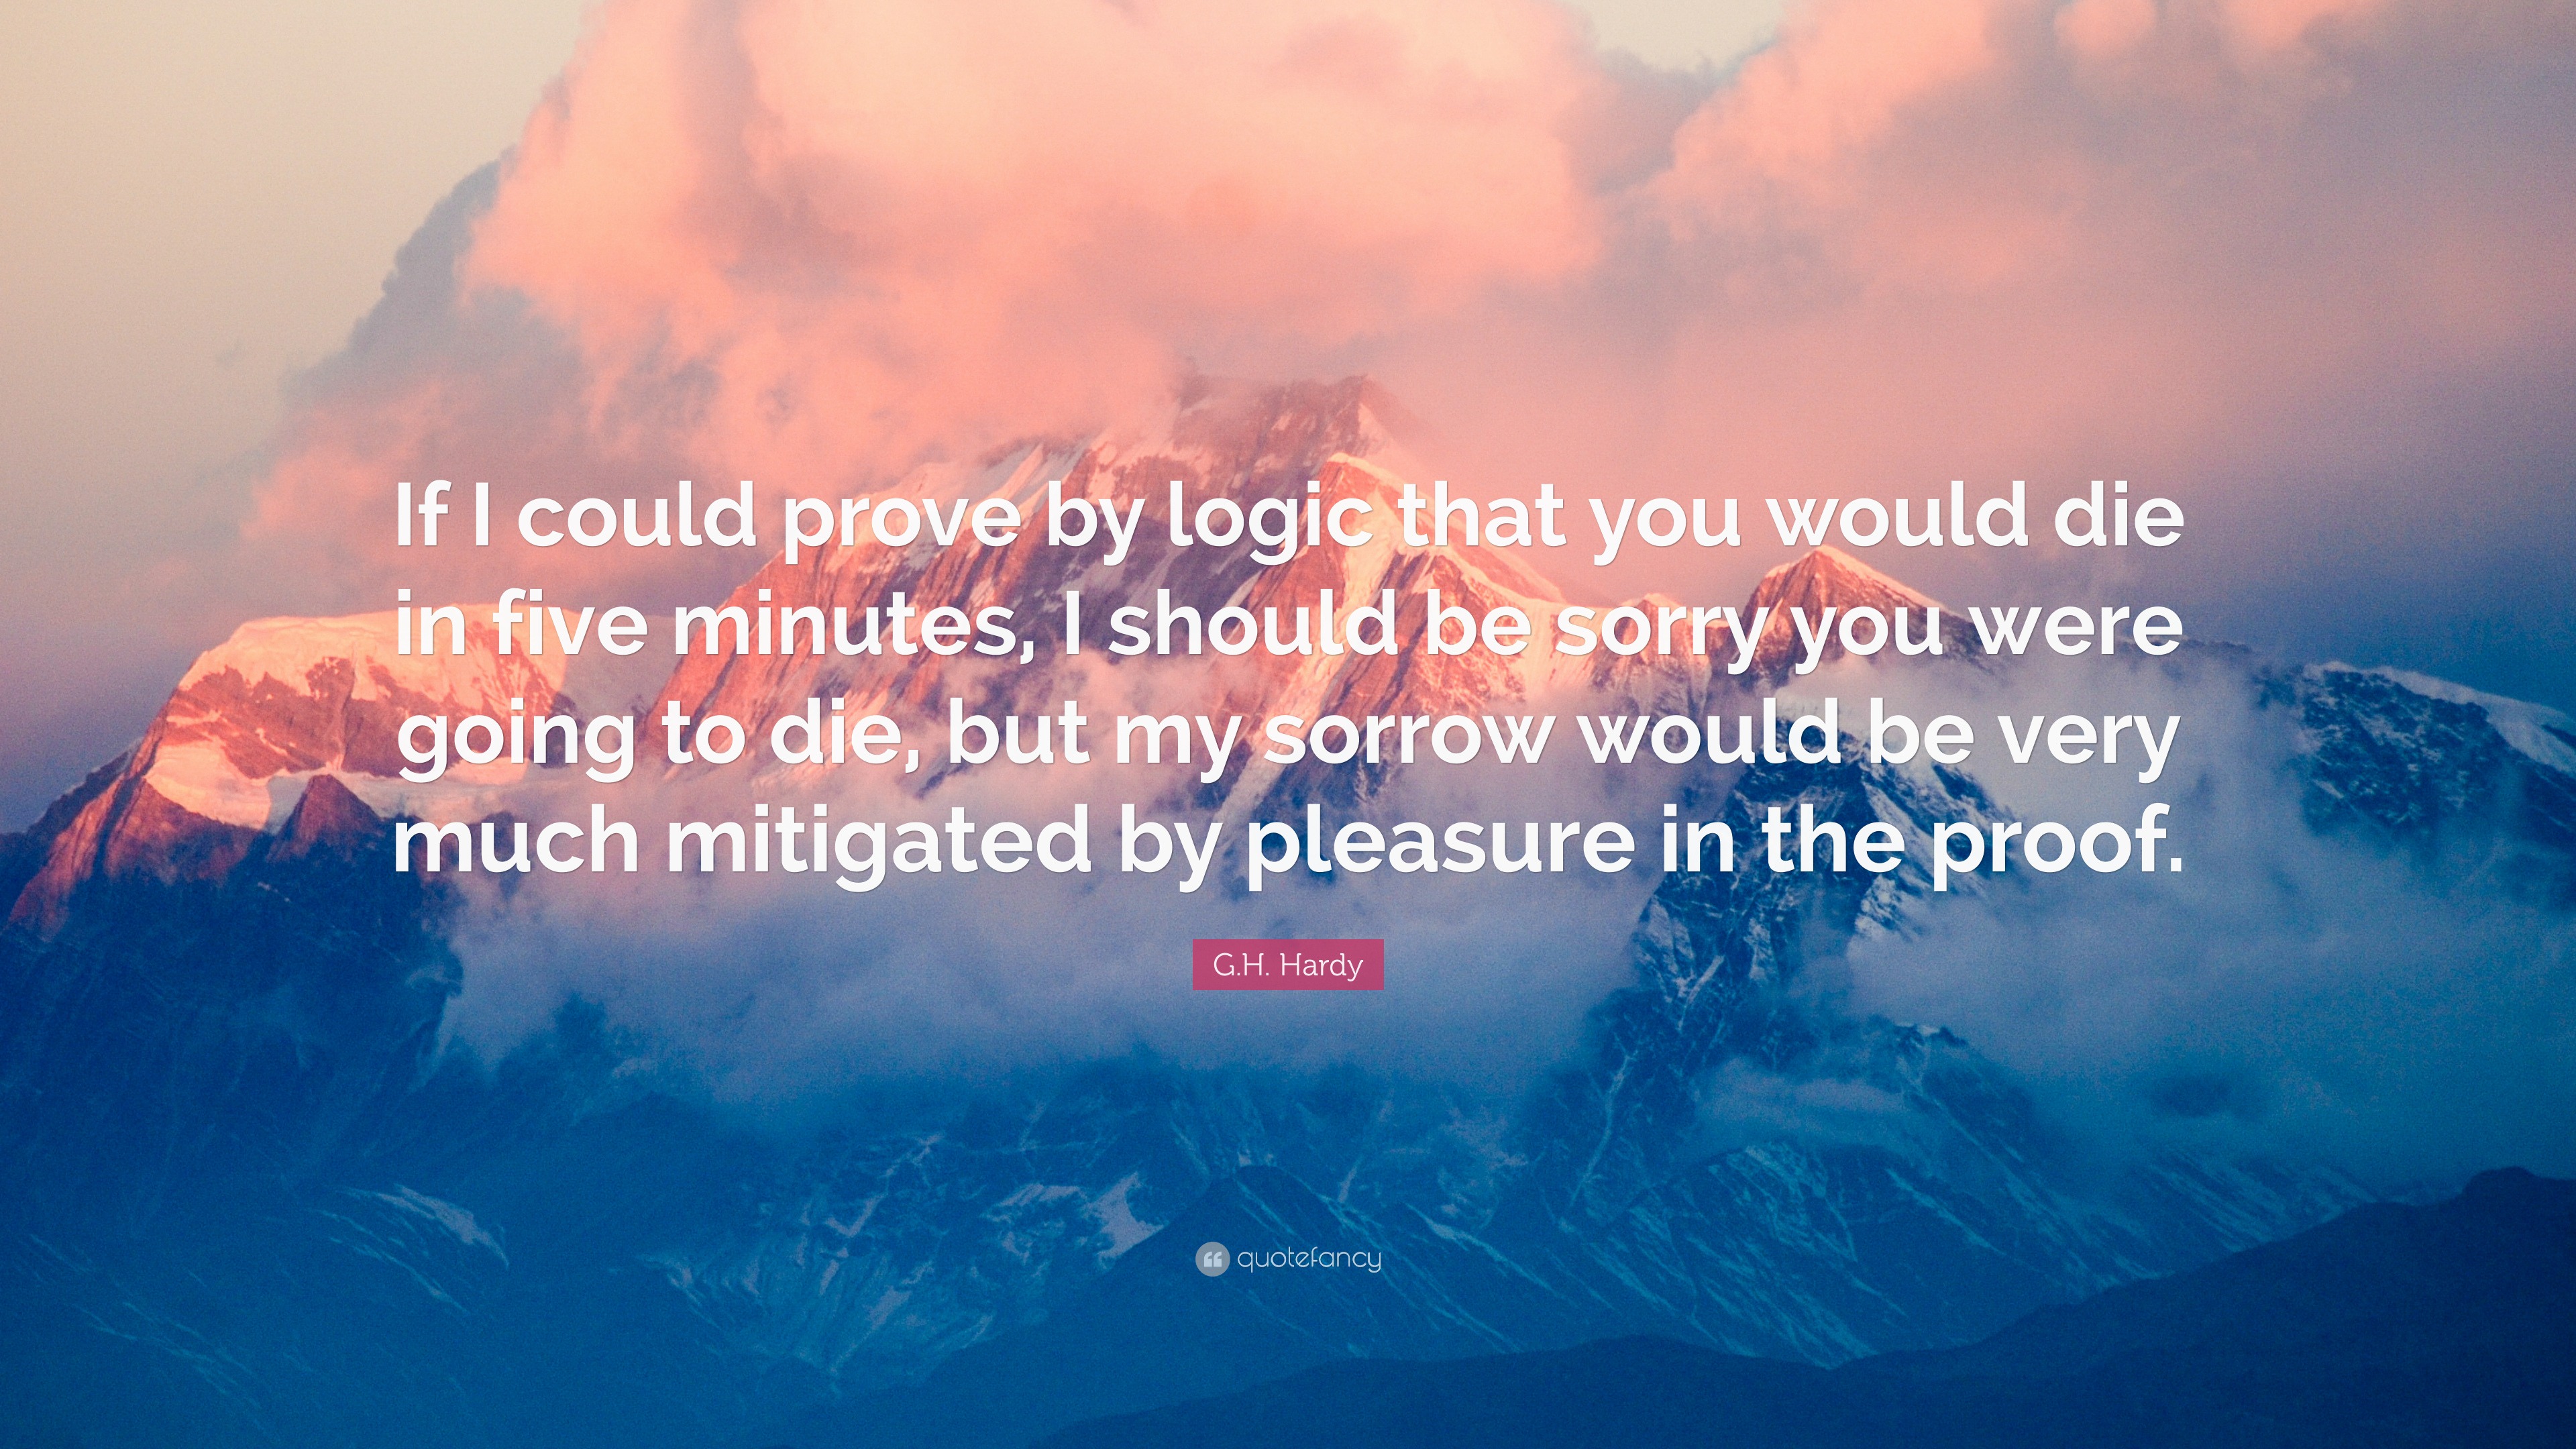 G.H. Hardy Quote: “If I could prove by logic that you would die in five ...